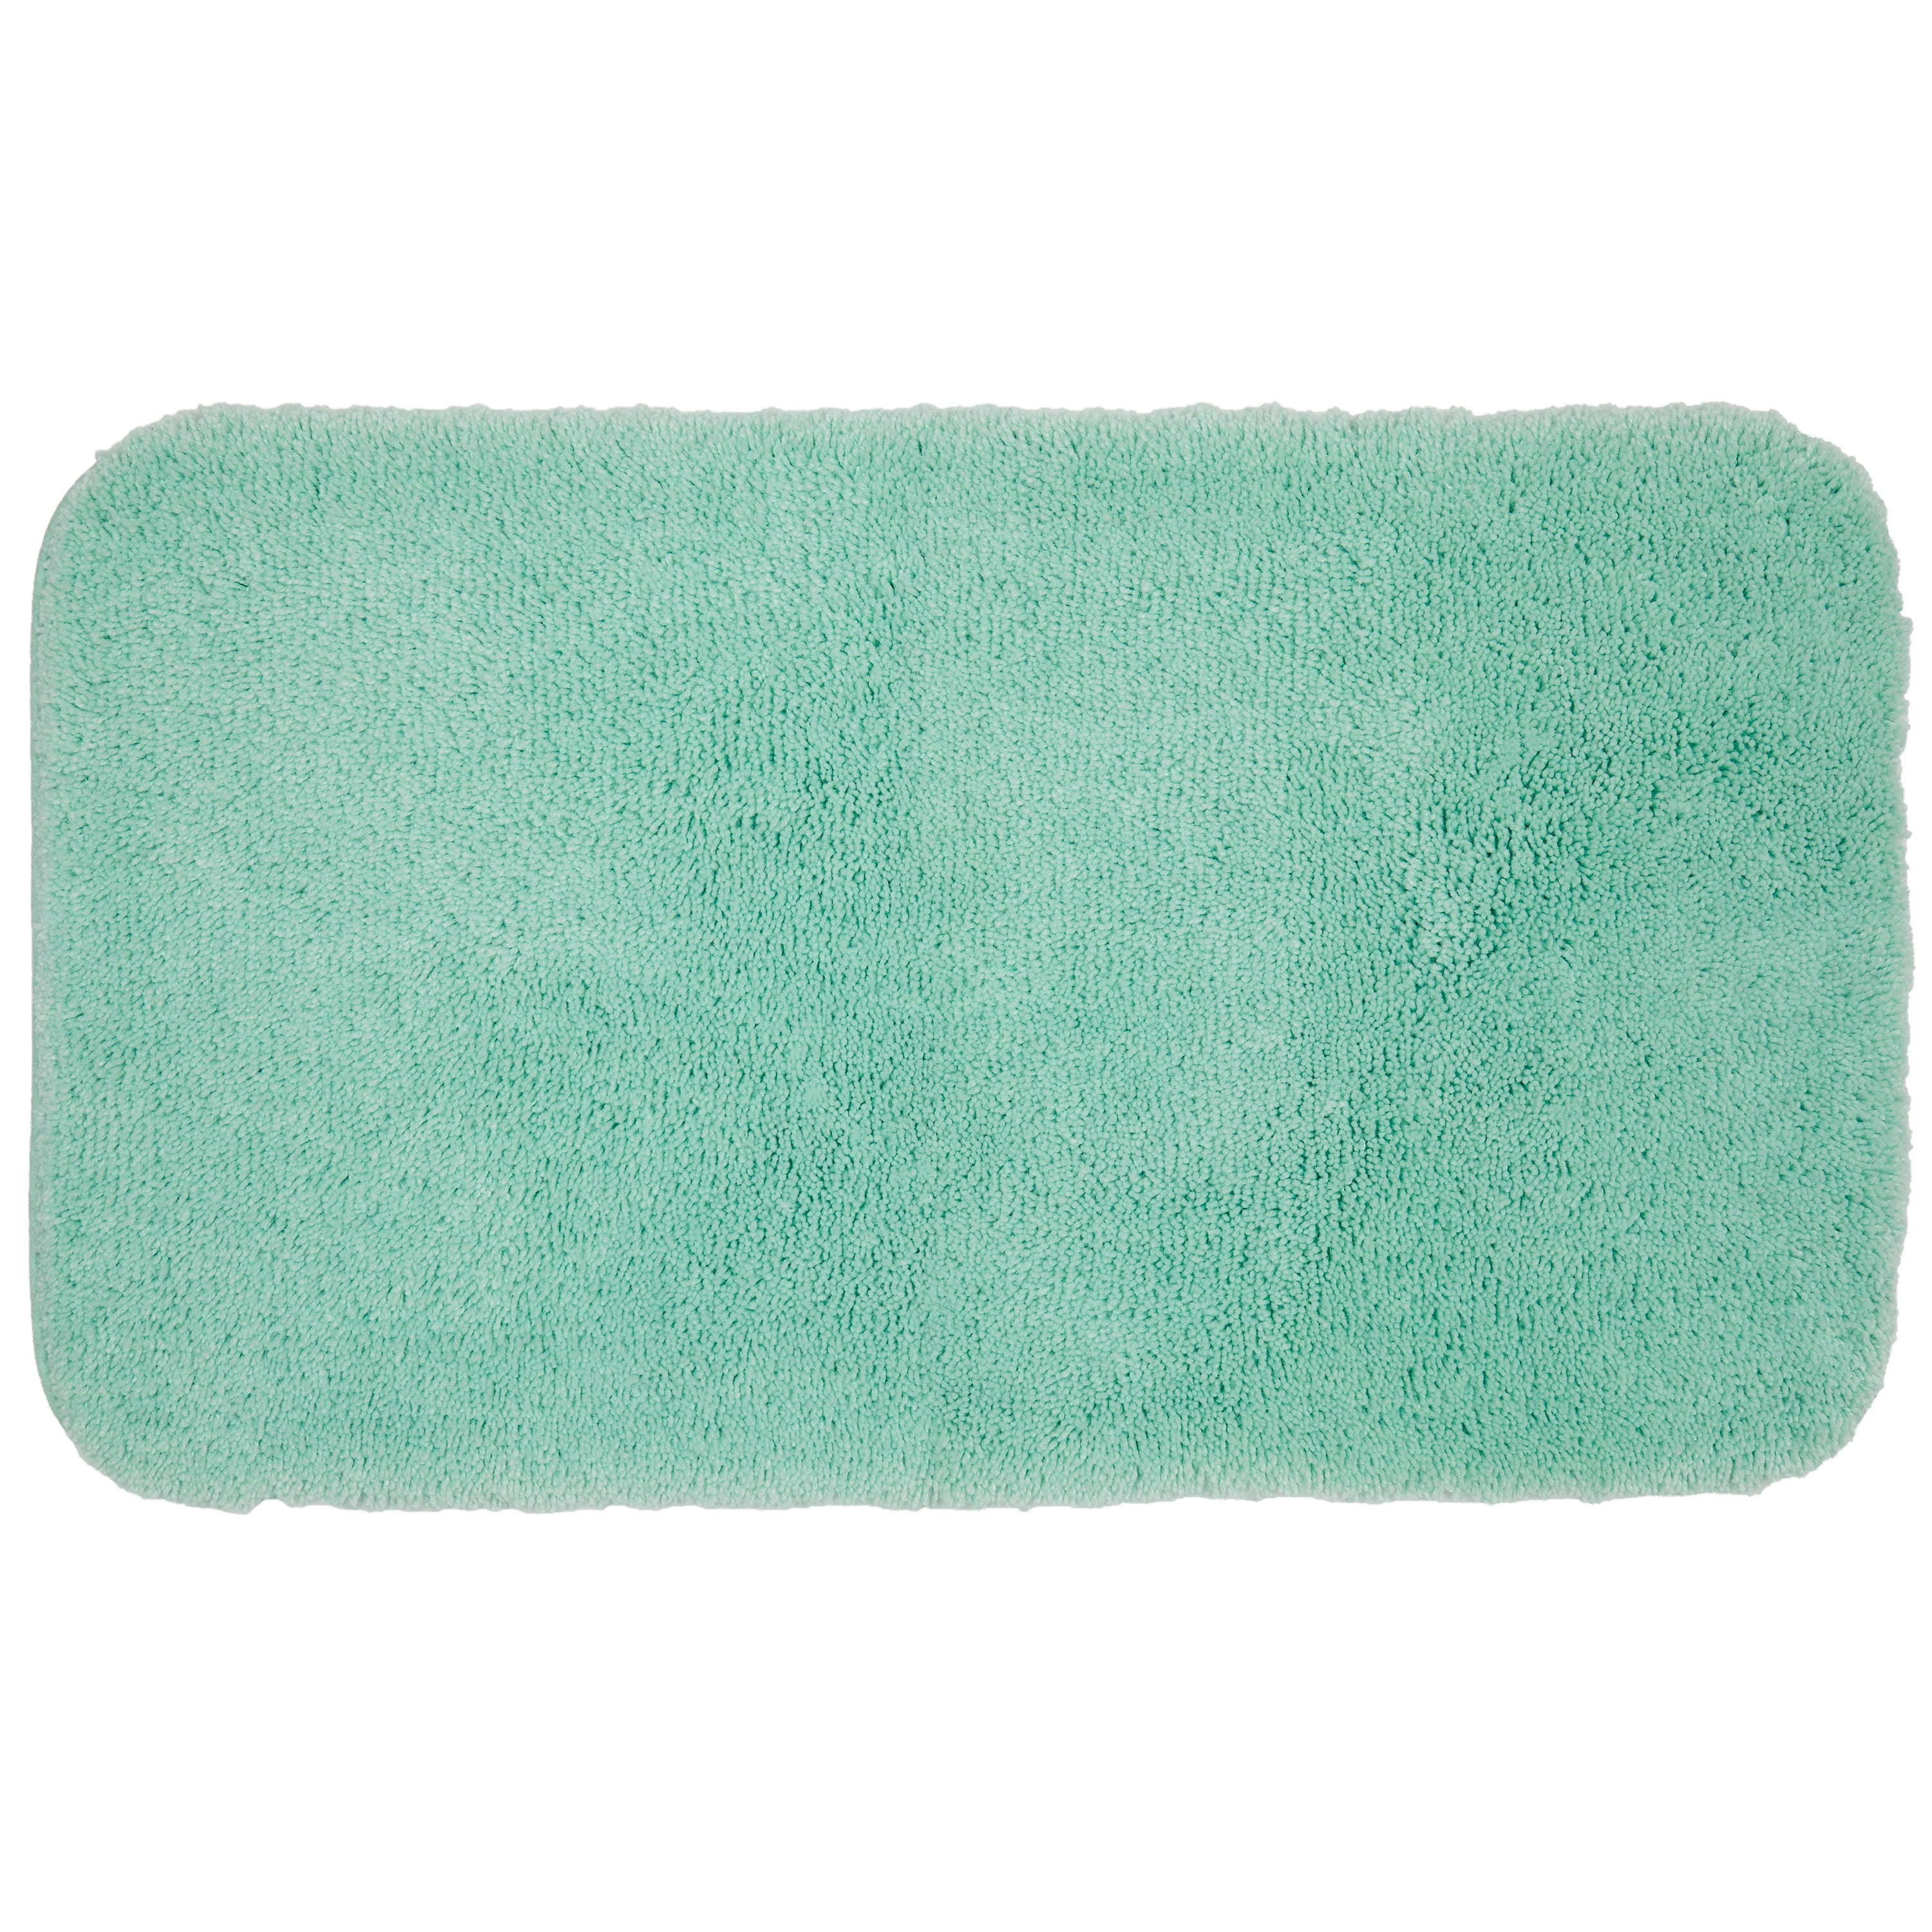 Mohawk Home Pure Perfection Sea Spray Bath Rug Scatter, 2